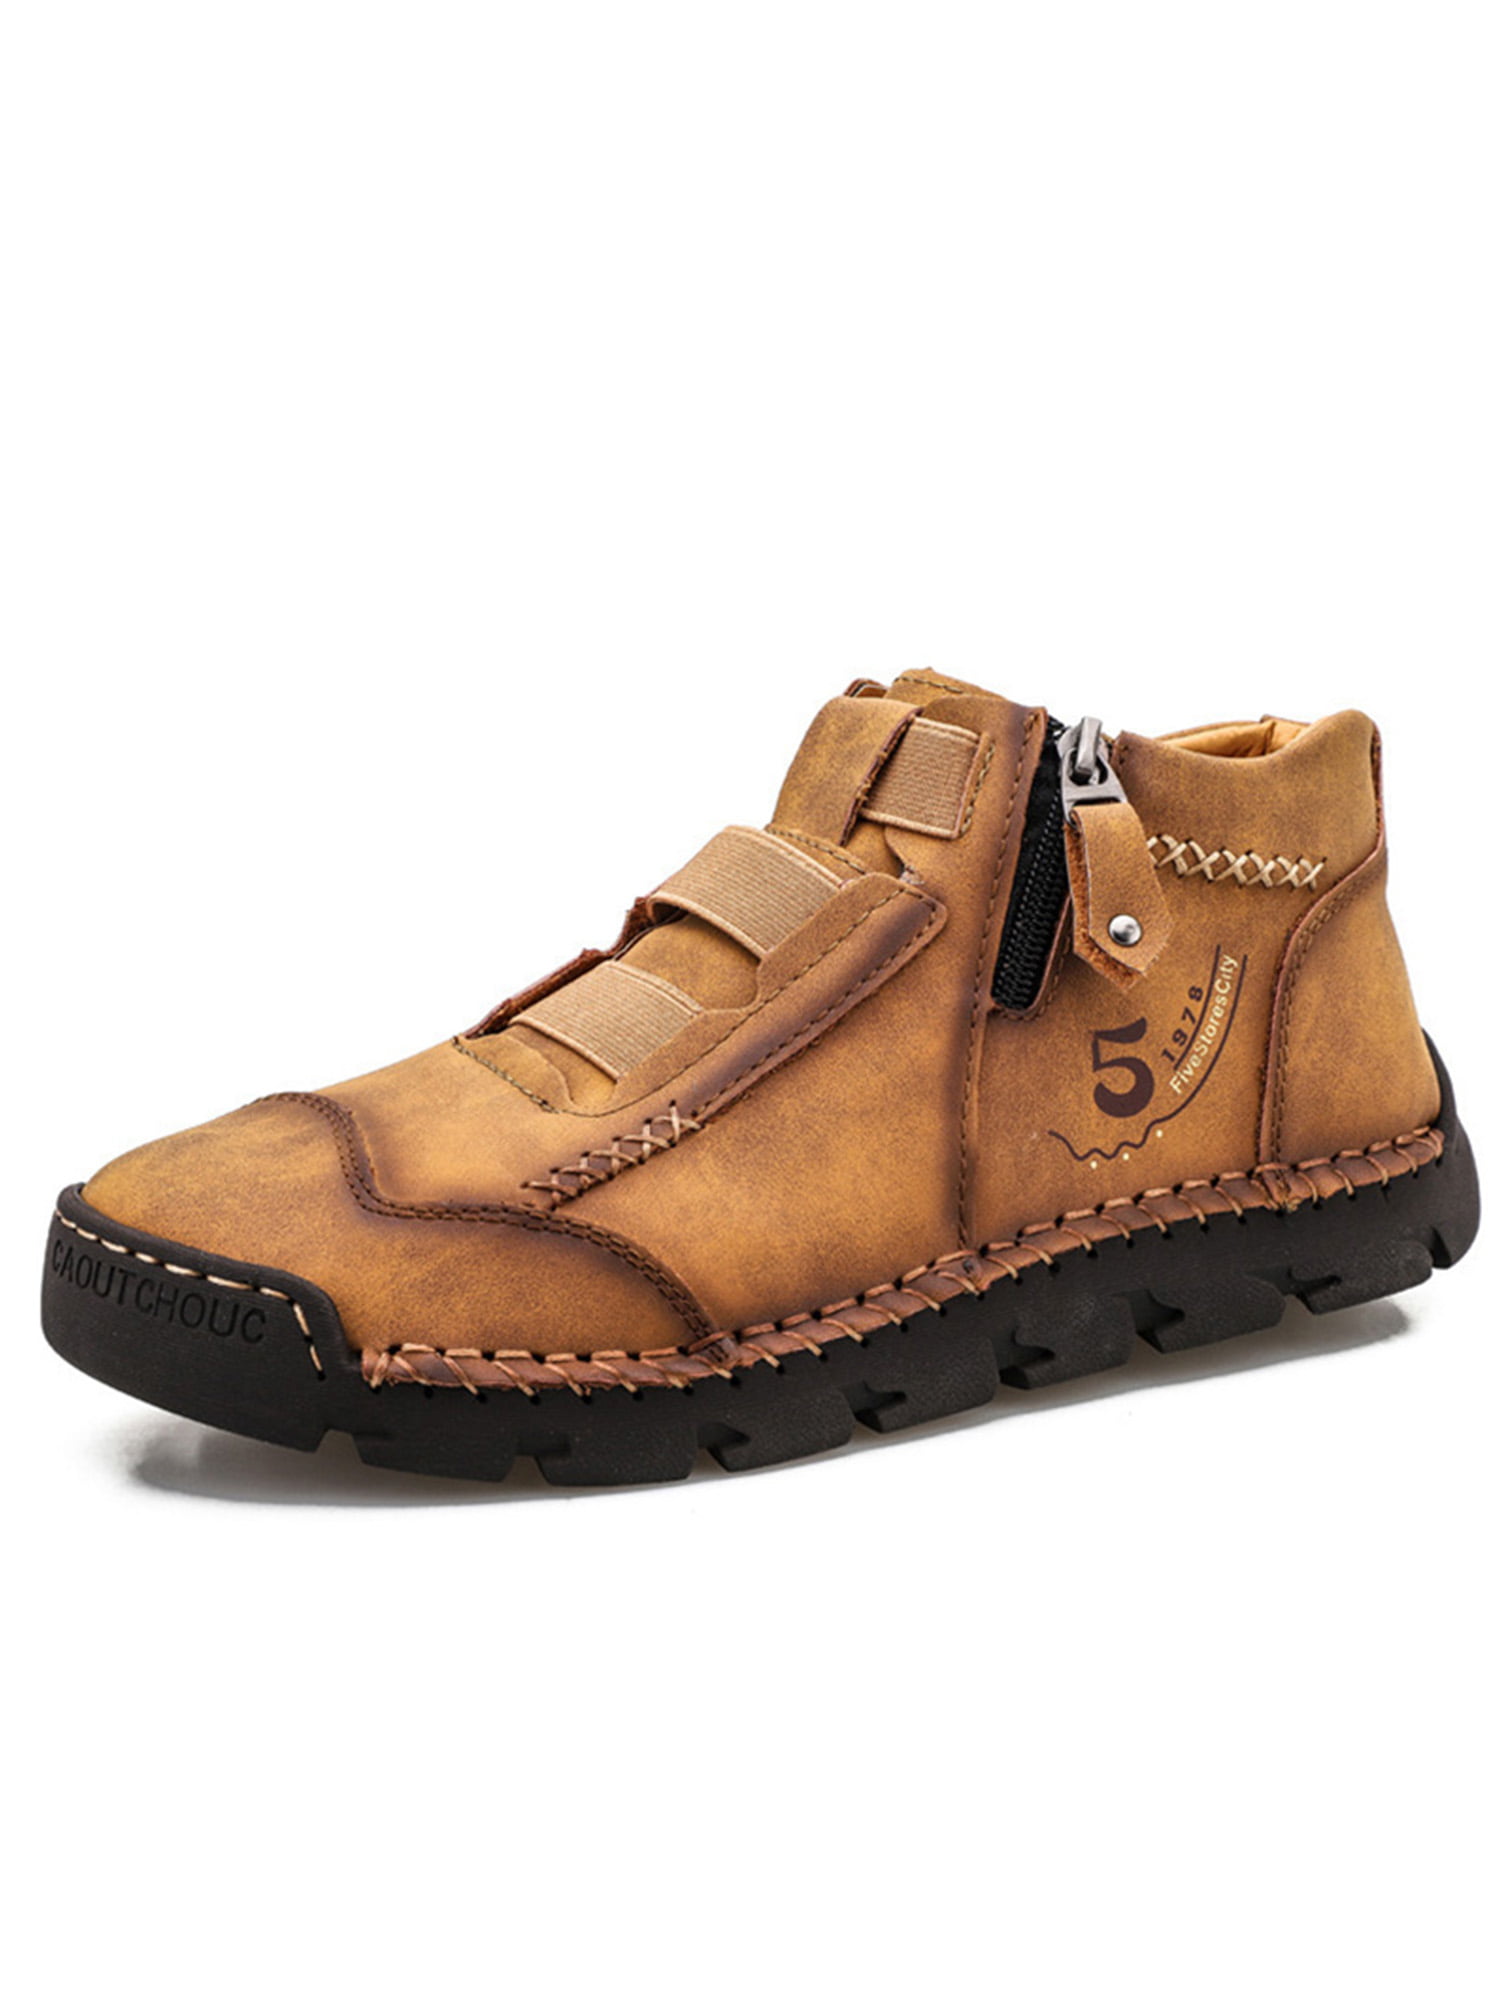 Details about   Men's Retro Vintage Leather Shoes Pull On Low Top Business Outdoor Work Boots 